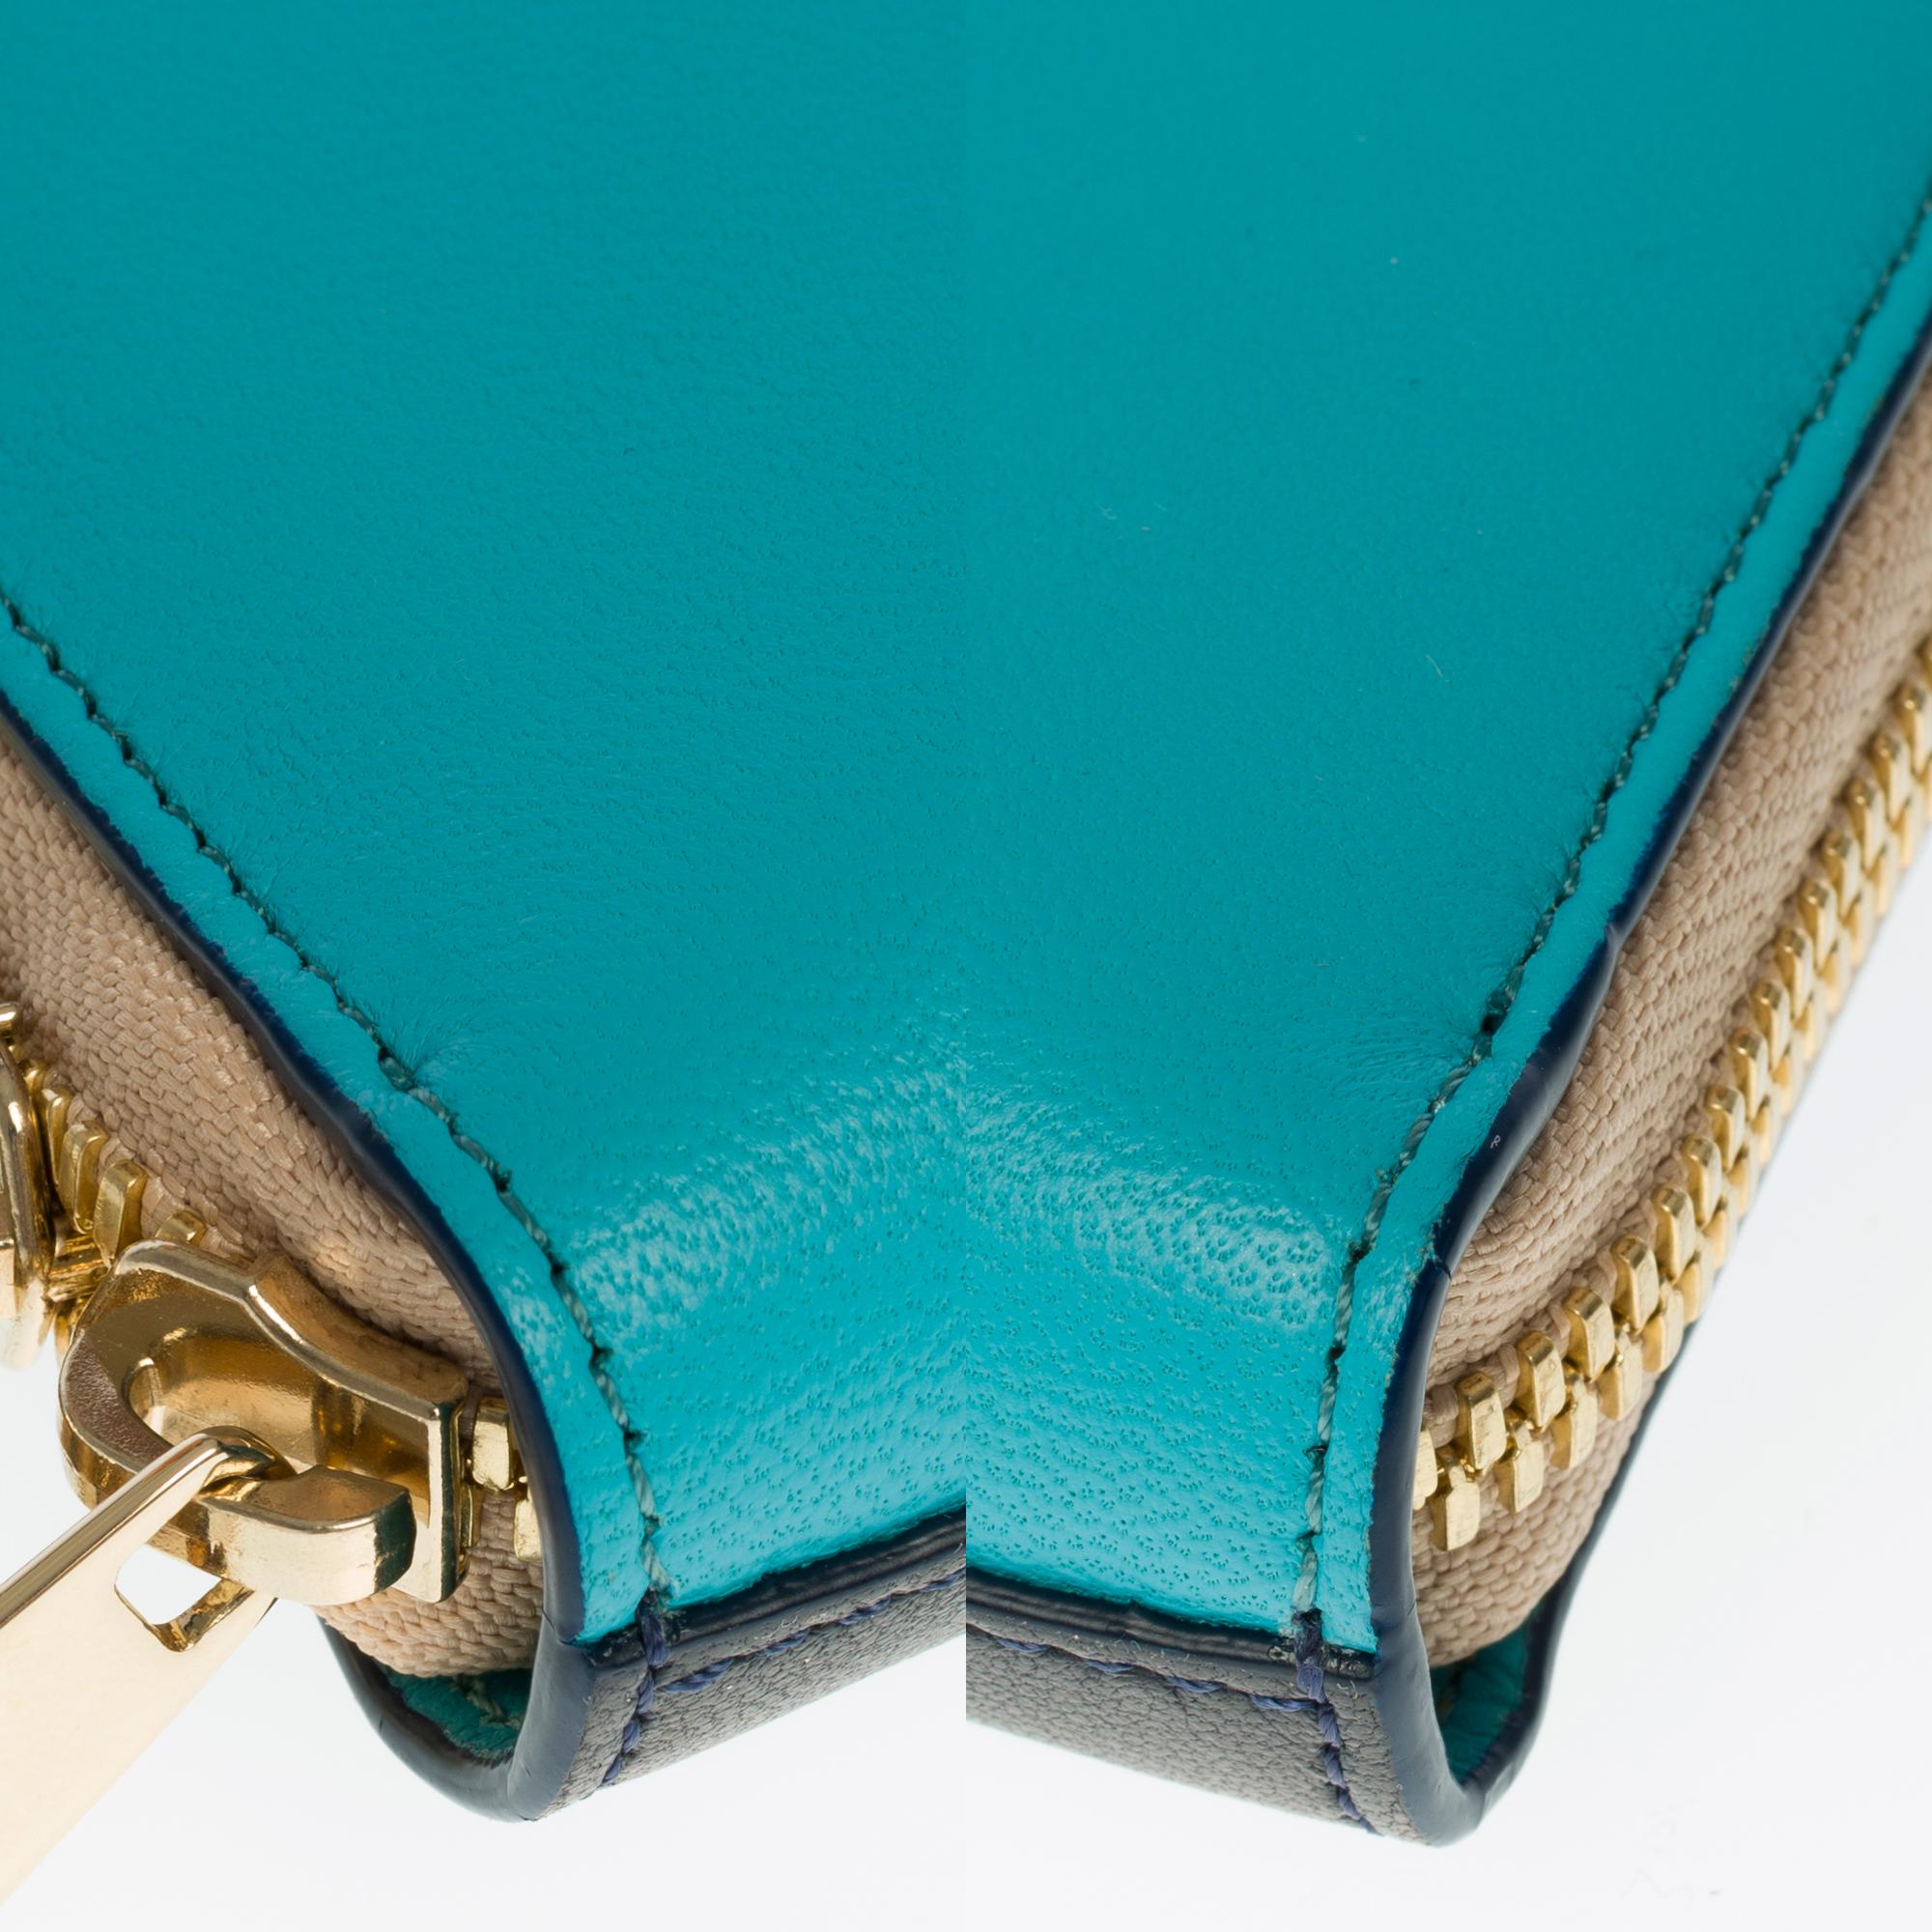 Charming Chloé bicolor wallet in turquoise and black leather with gold hardware 5